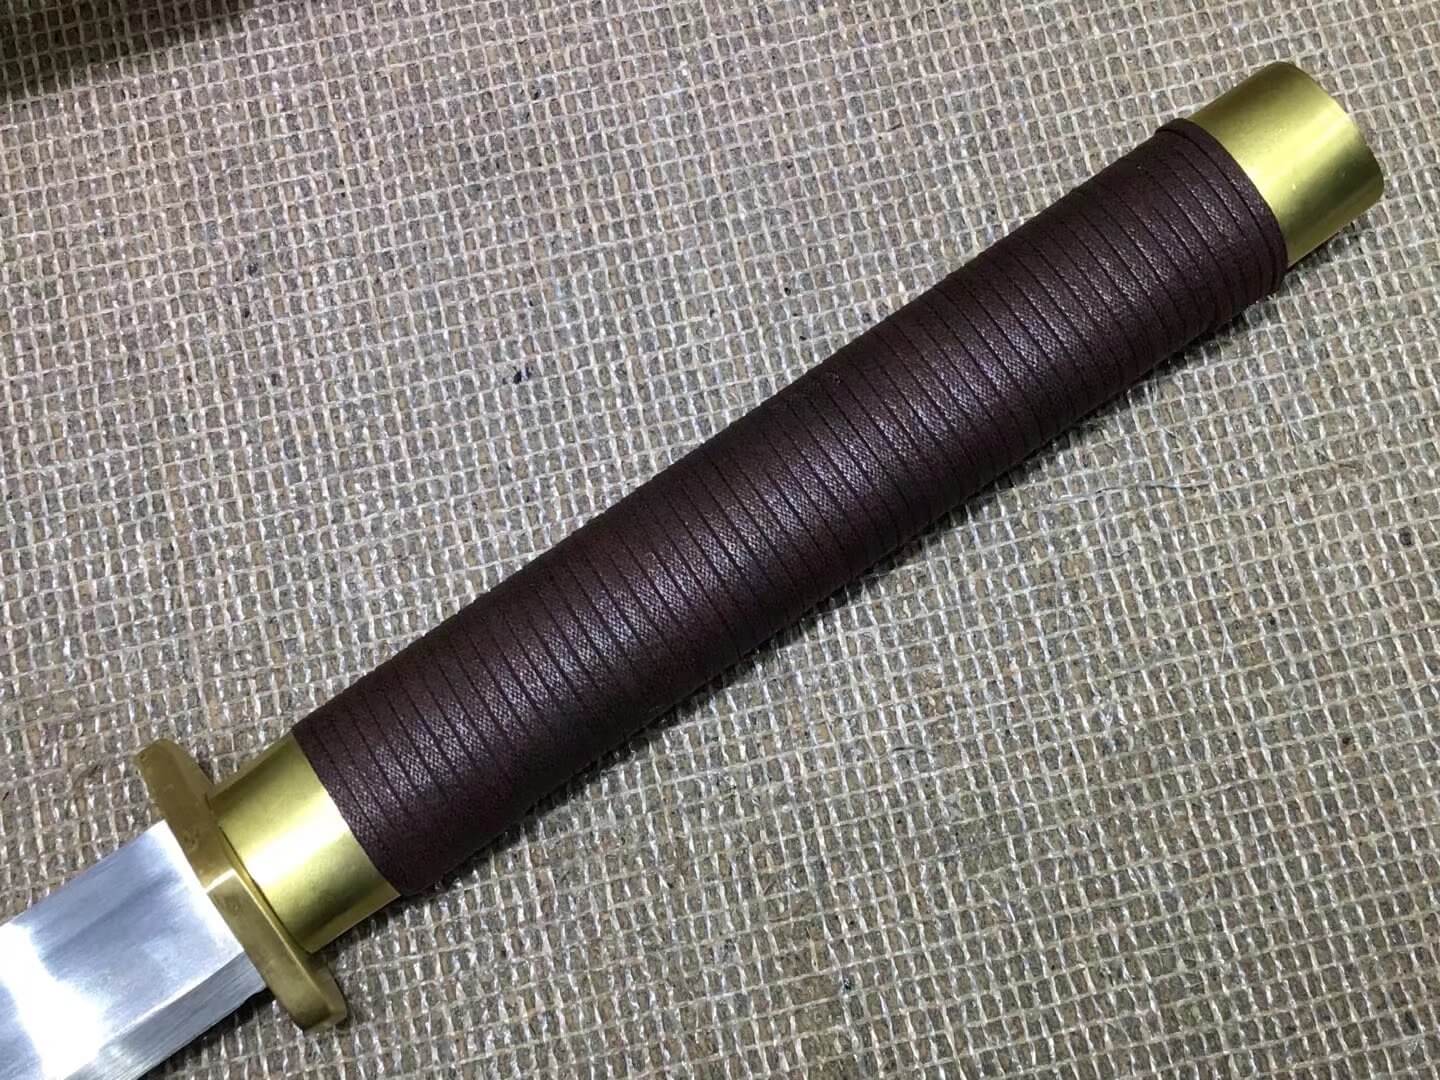 14 Blades sword,High carbon steel blade,Redwood scabbard,Brass fittings - Chinese sword shop